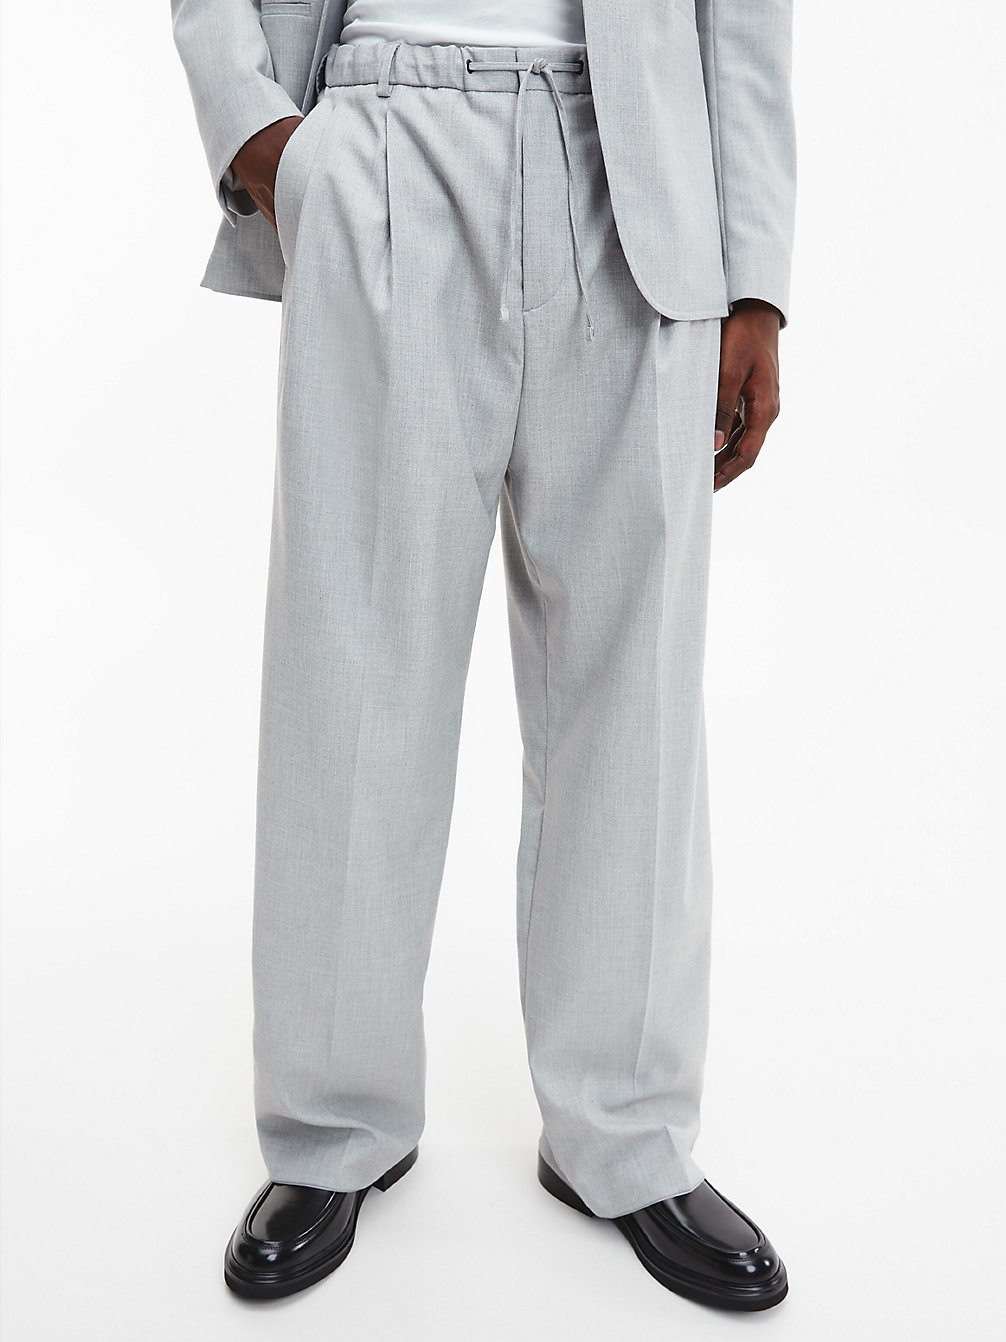 GREY FOG Recycled Microstructure Trousers undefined men Calvin Klein